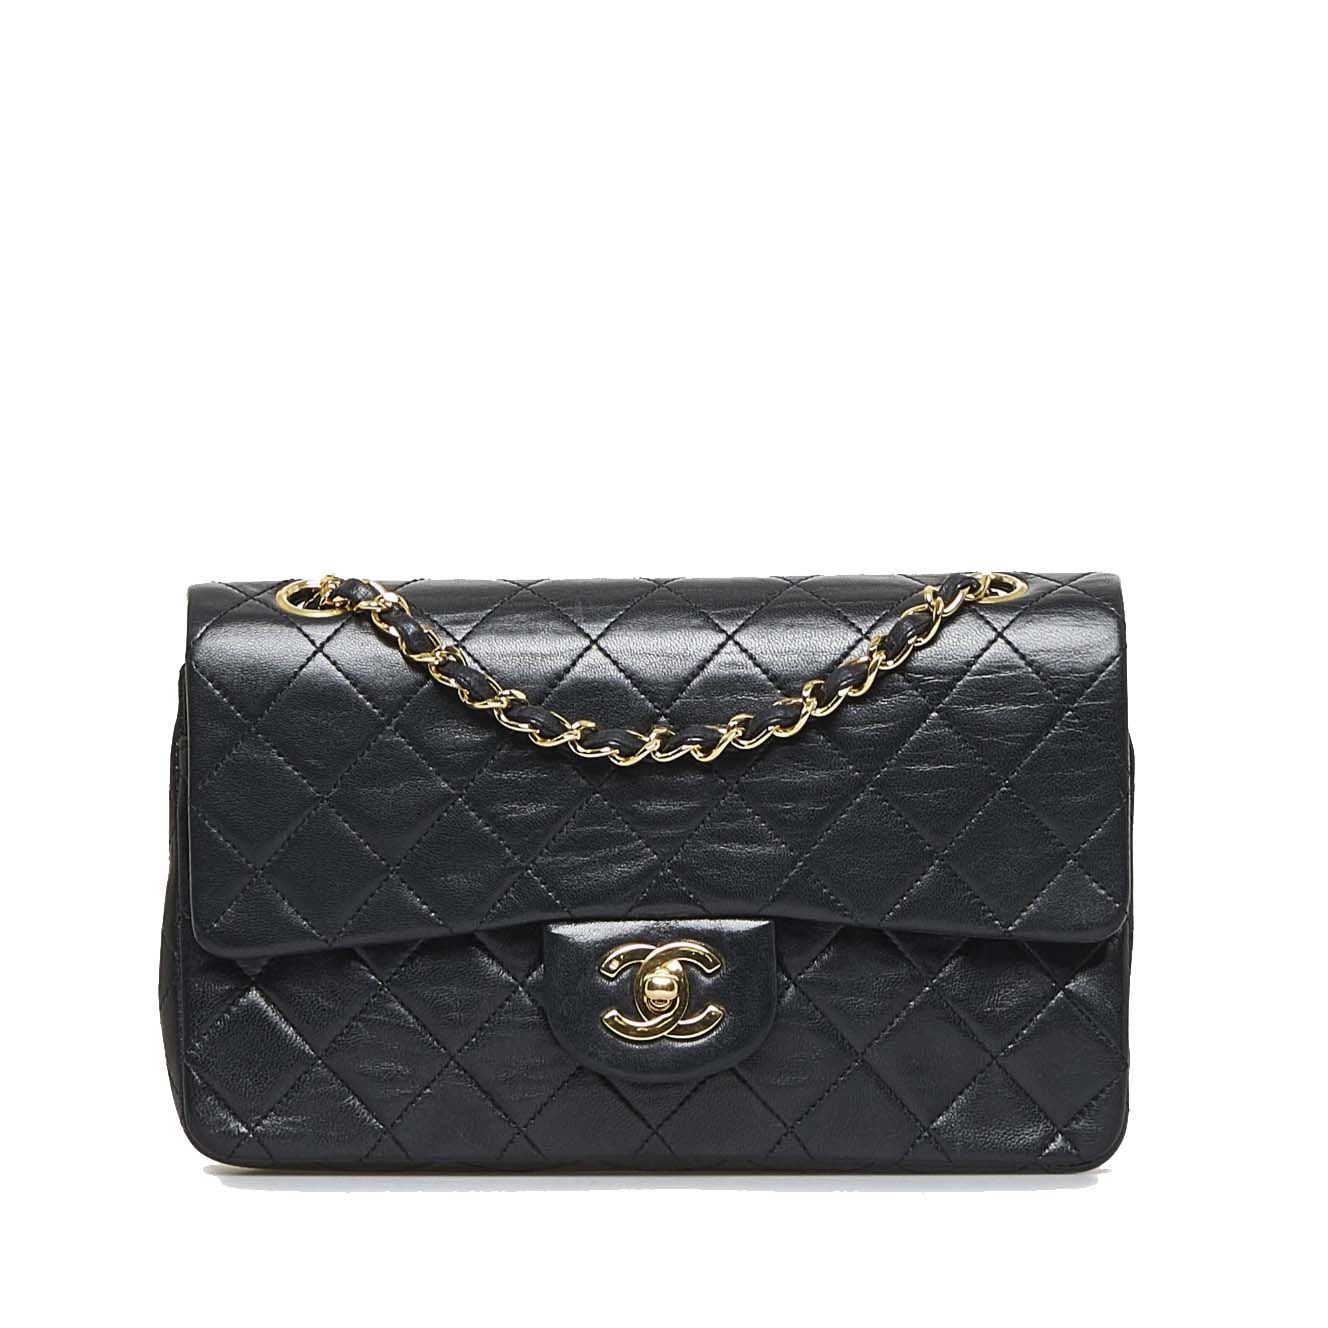 Buy Classic Chanel Bag Online In India  Etsy India